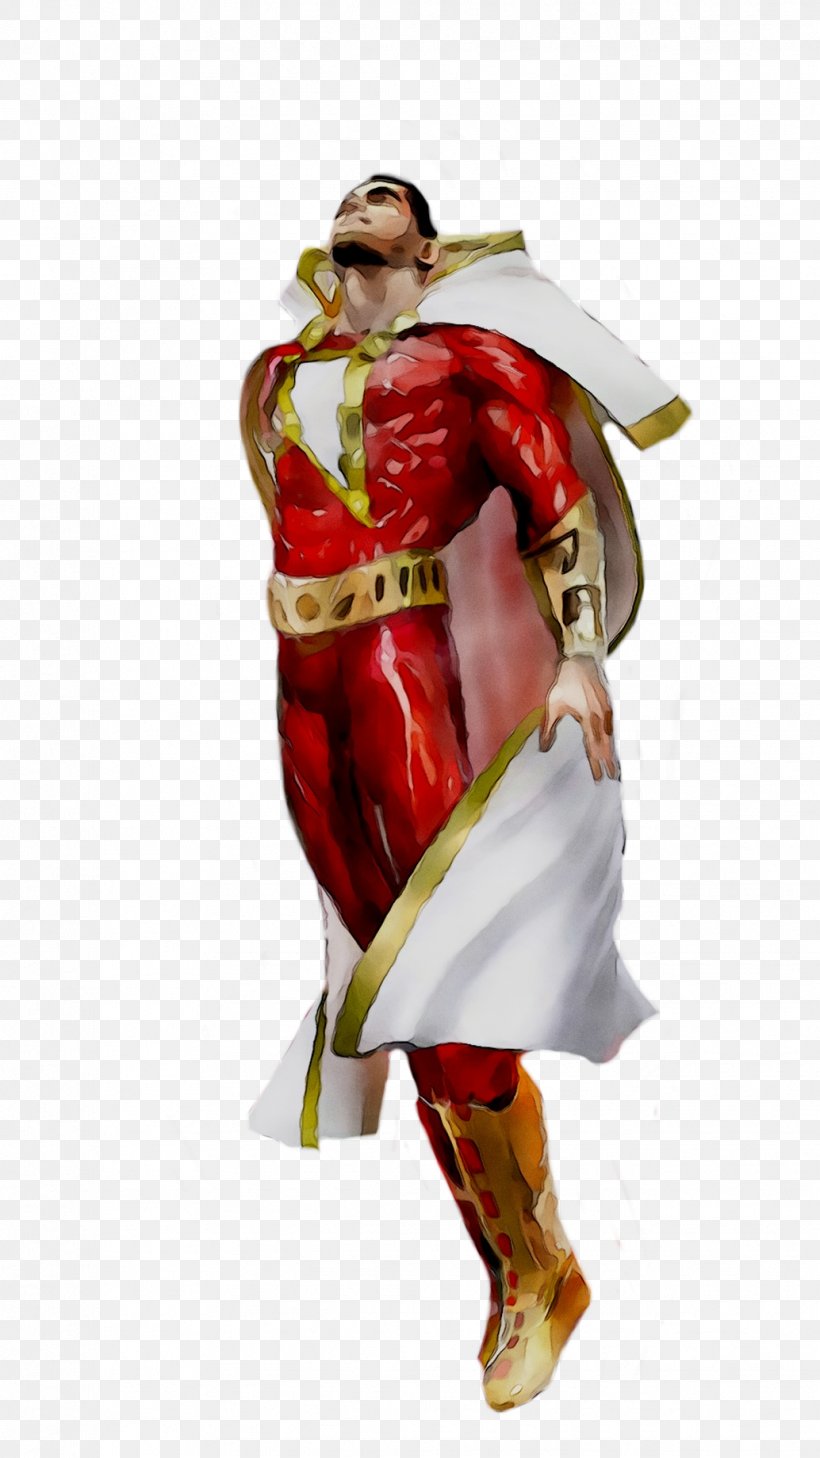 Superhero Muscle Figurine, PNG, 1034x1839px, Superhero, Action Figure, Costume, Costume Design, Fictional Character Download Free